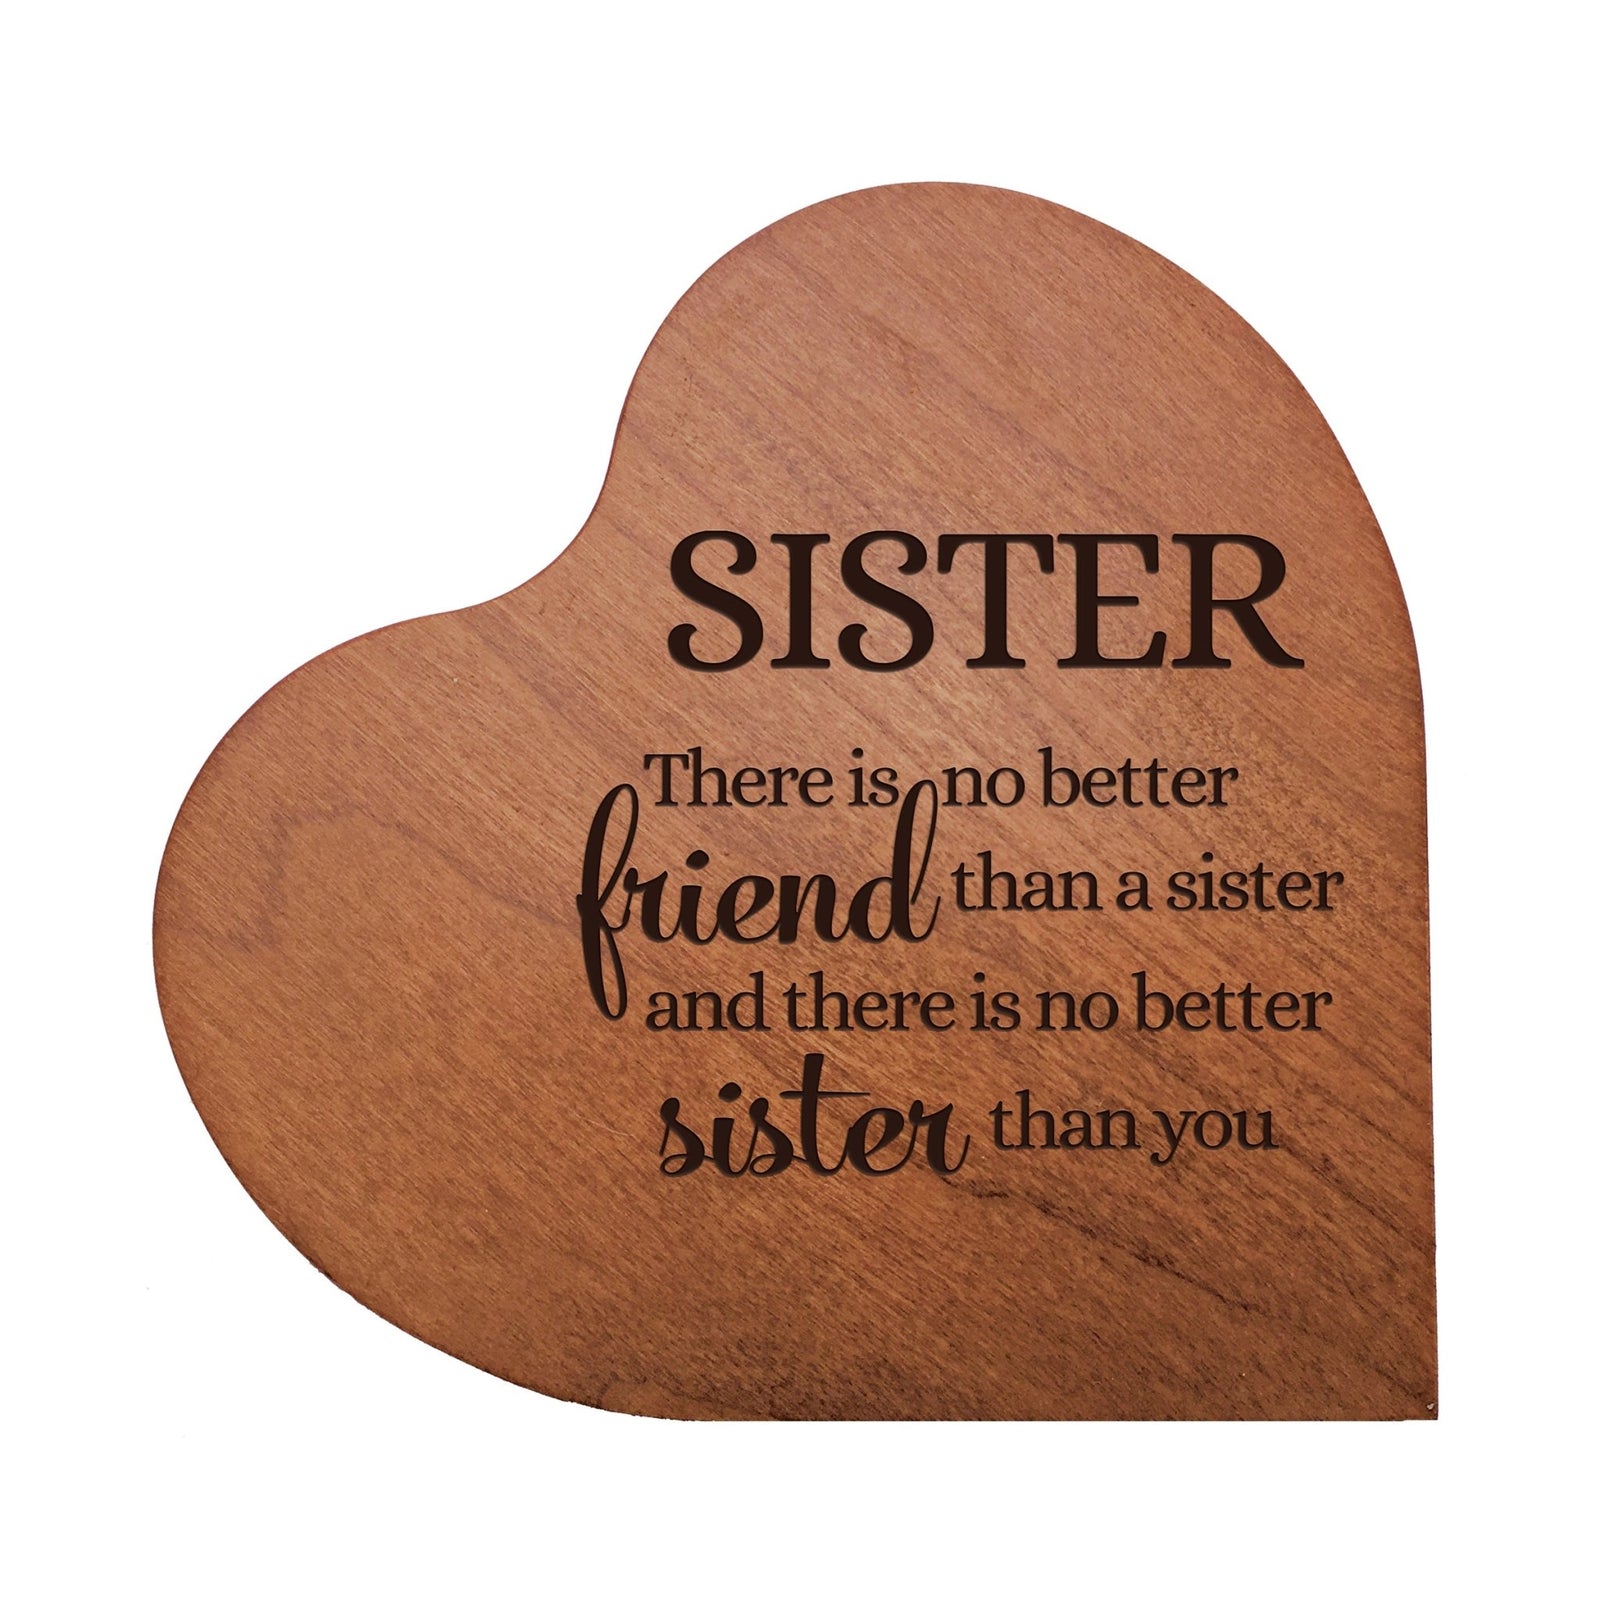 Engraved Wooden Heart Block 5” x 5.75” x 0.75”- Sister - LifeSong Milestones